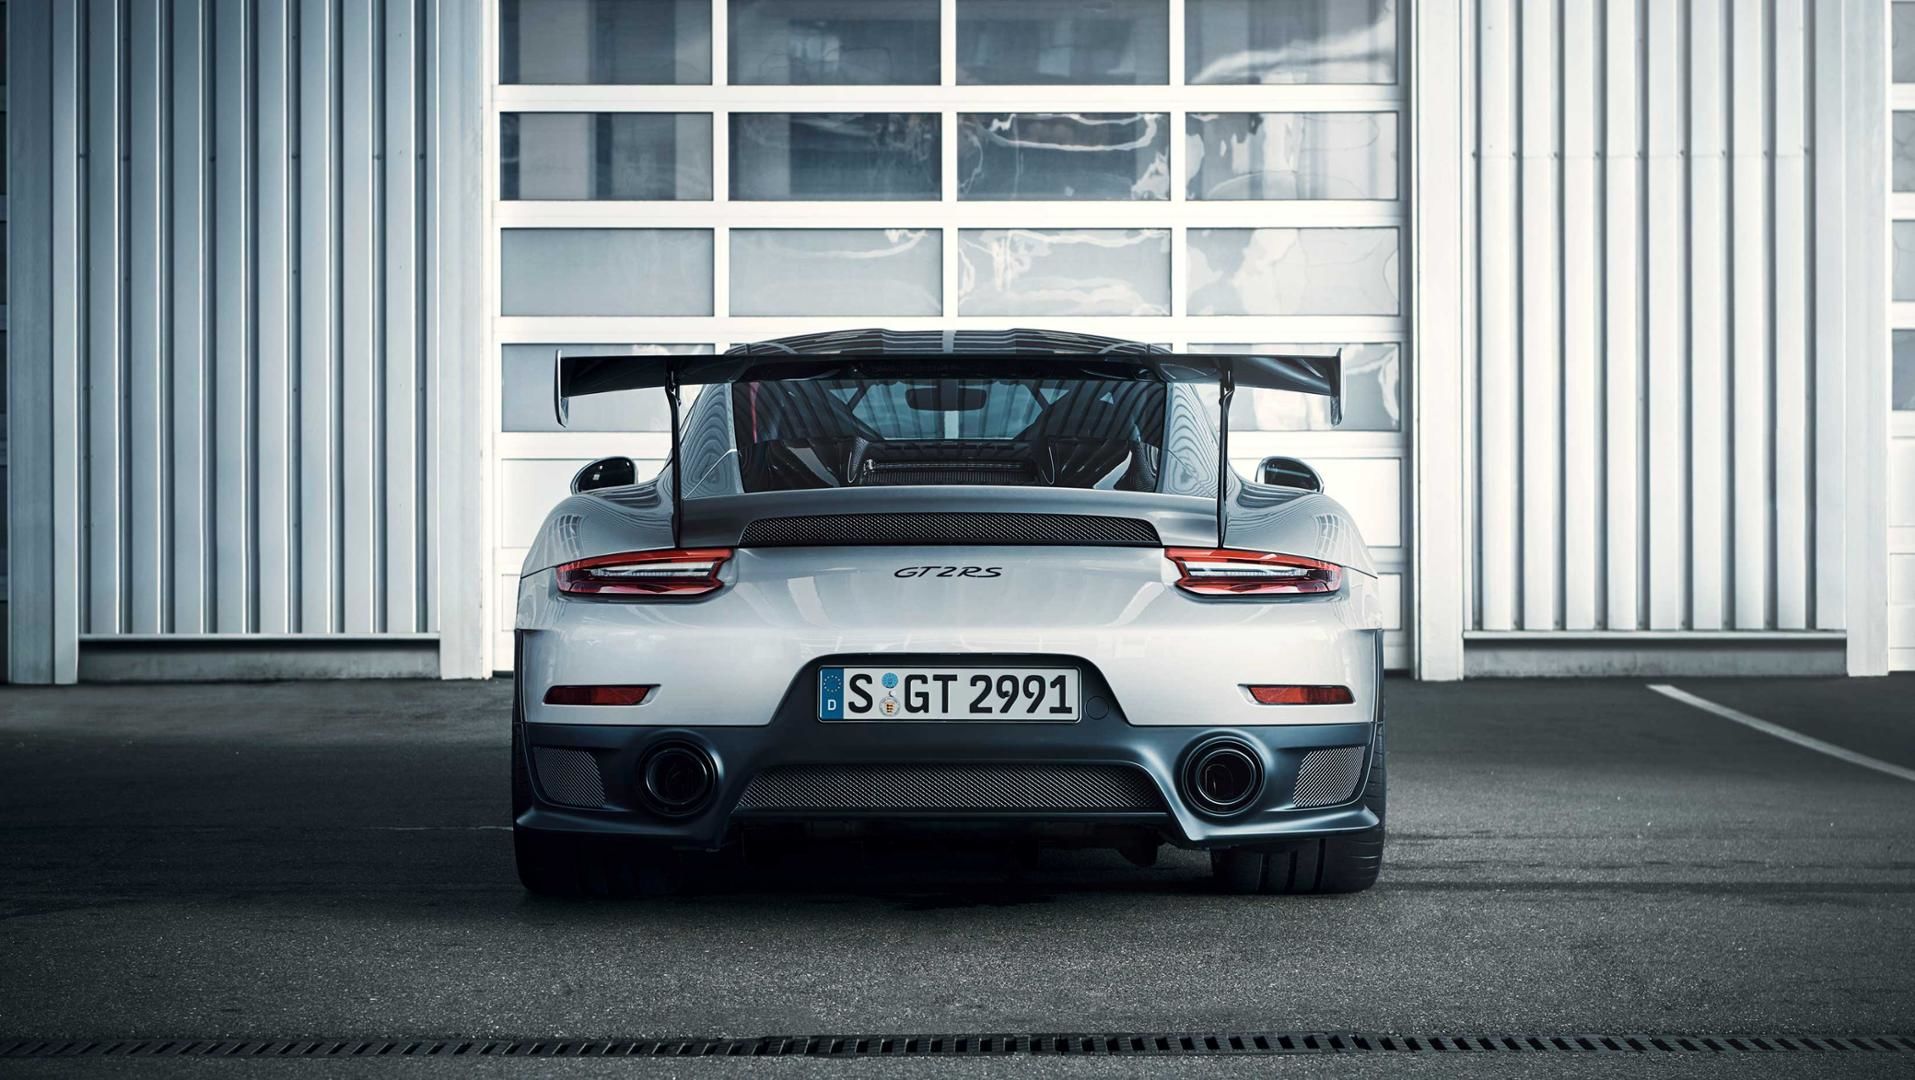 Porsche 911 GT2 RS Official Images Leaked Ahead Of Debut